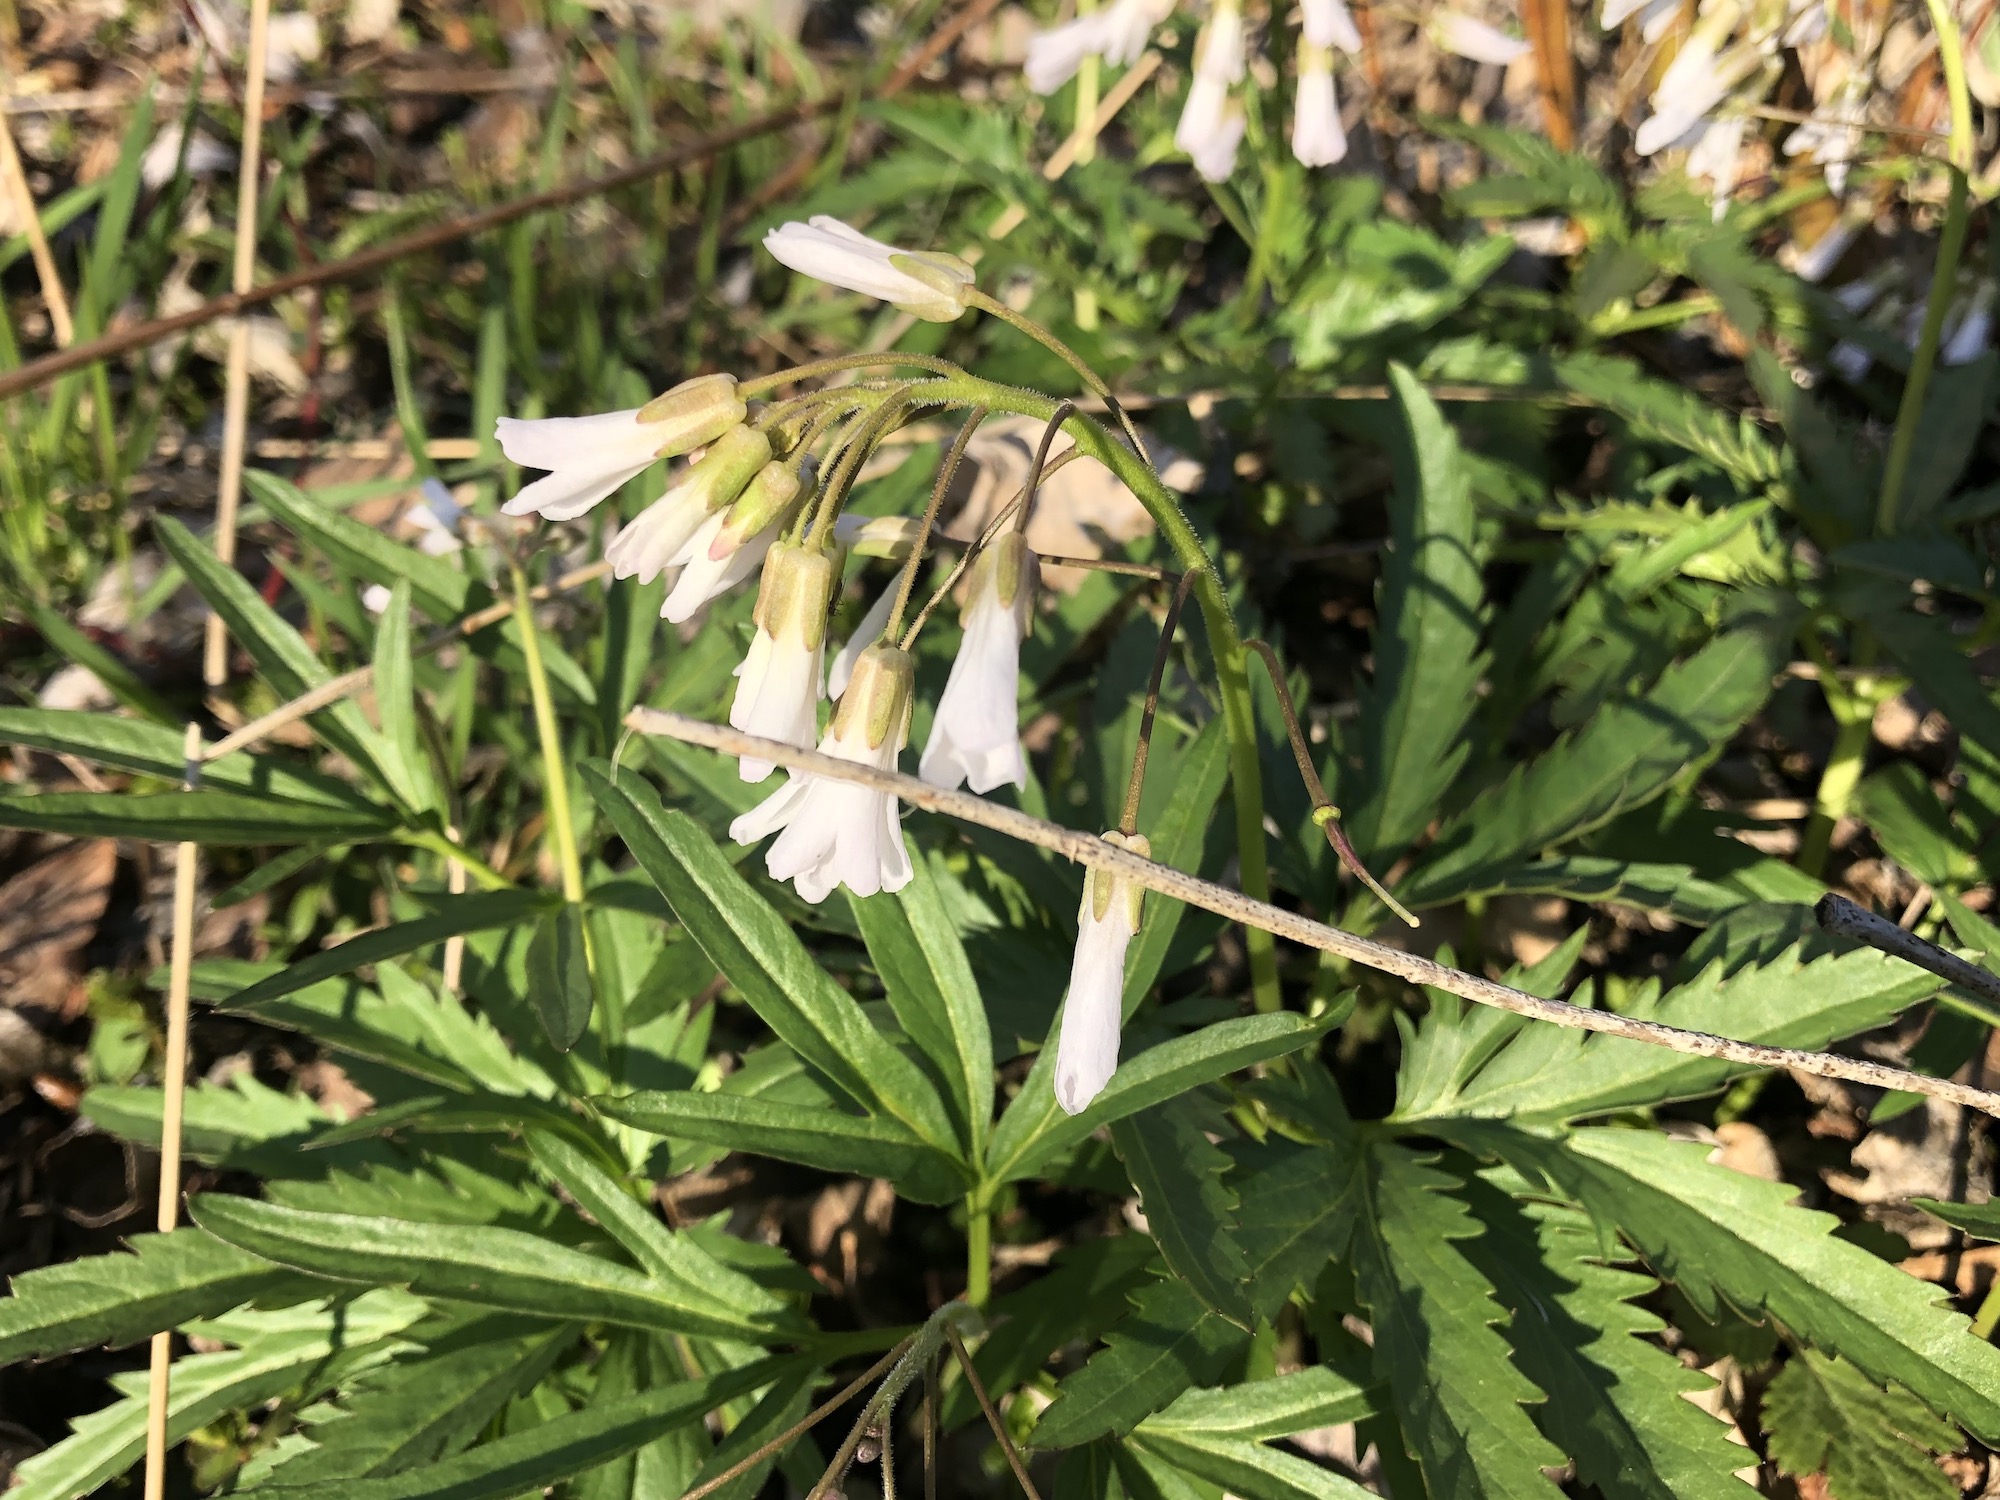 Cutleaf Toothwort in Oak Savanna by Council Ring in Madison, Wisconsin on April 18, 2020.